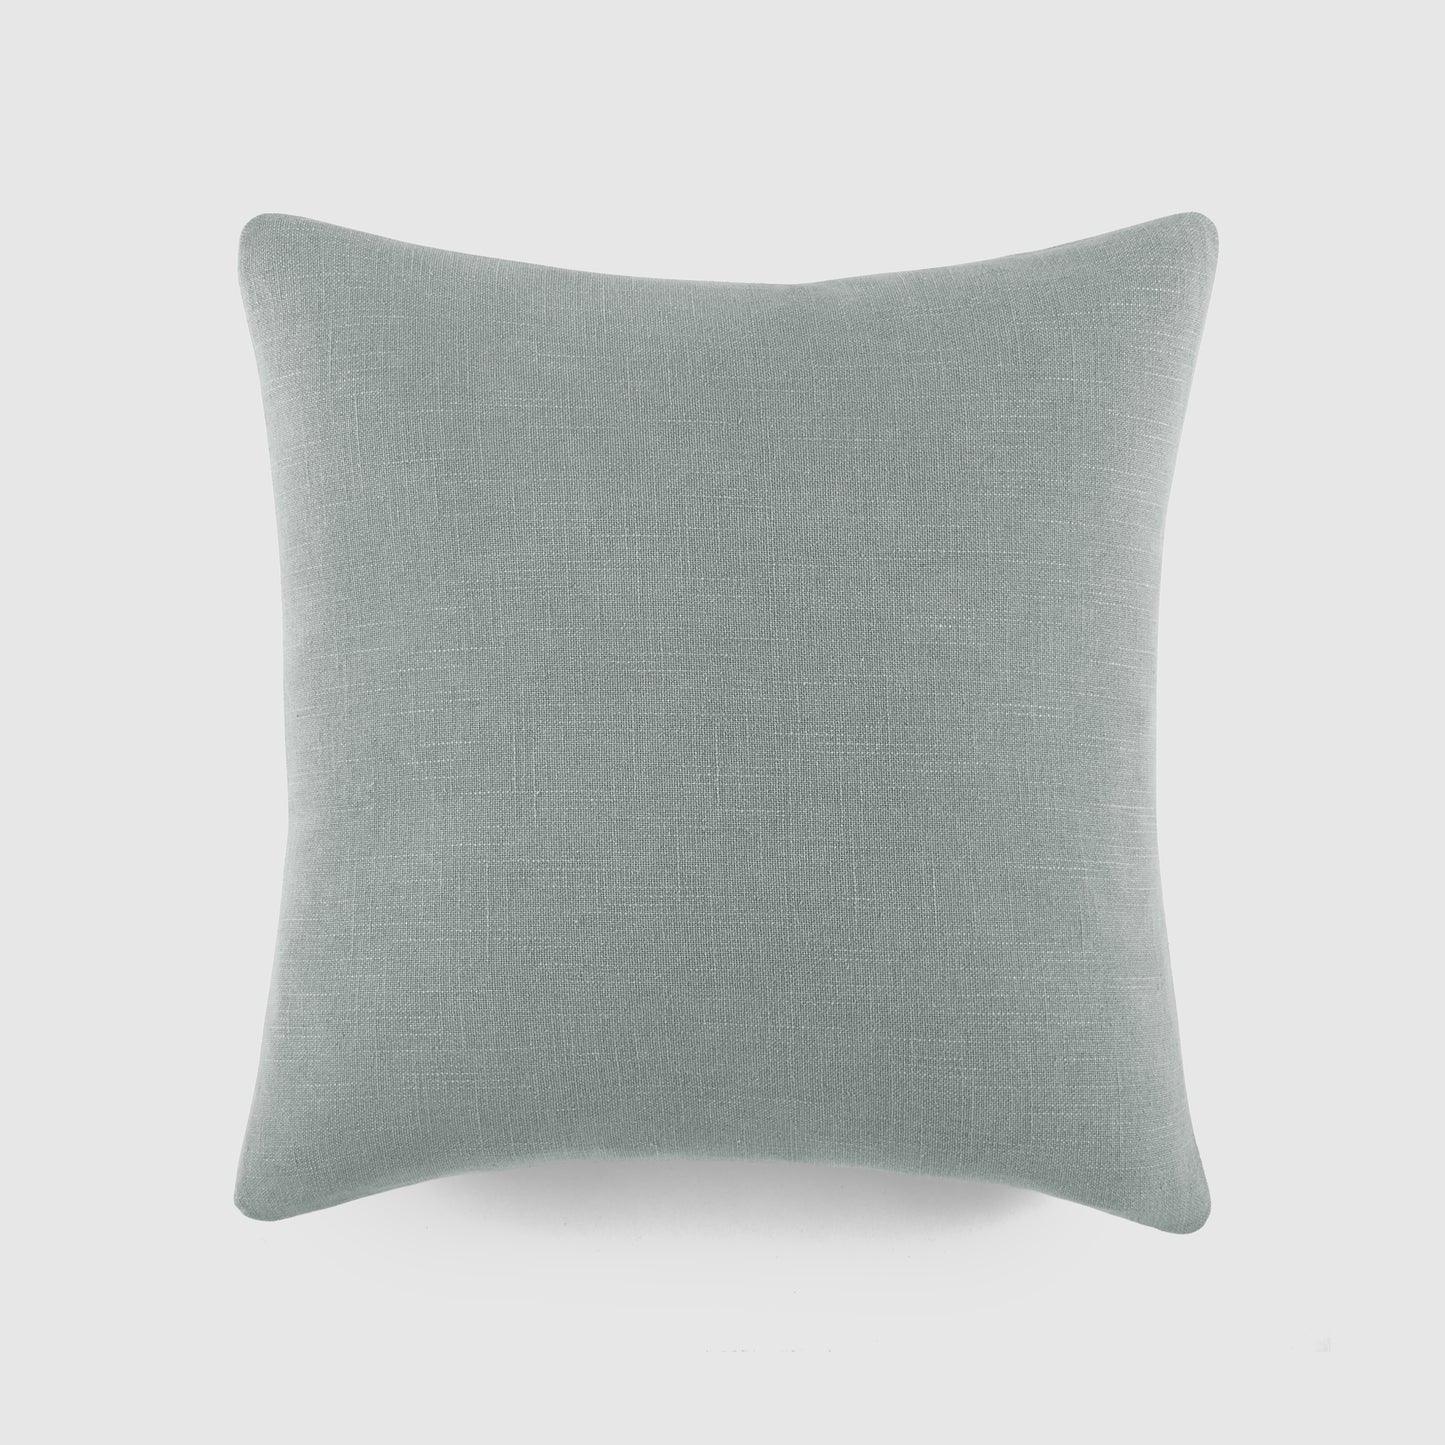 Washed and Distressed Cotton Decor Throw Pillow in Stone Washed